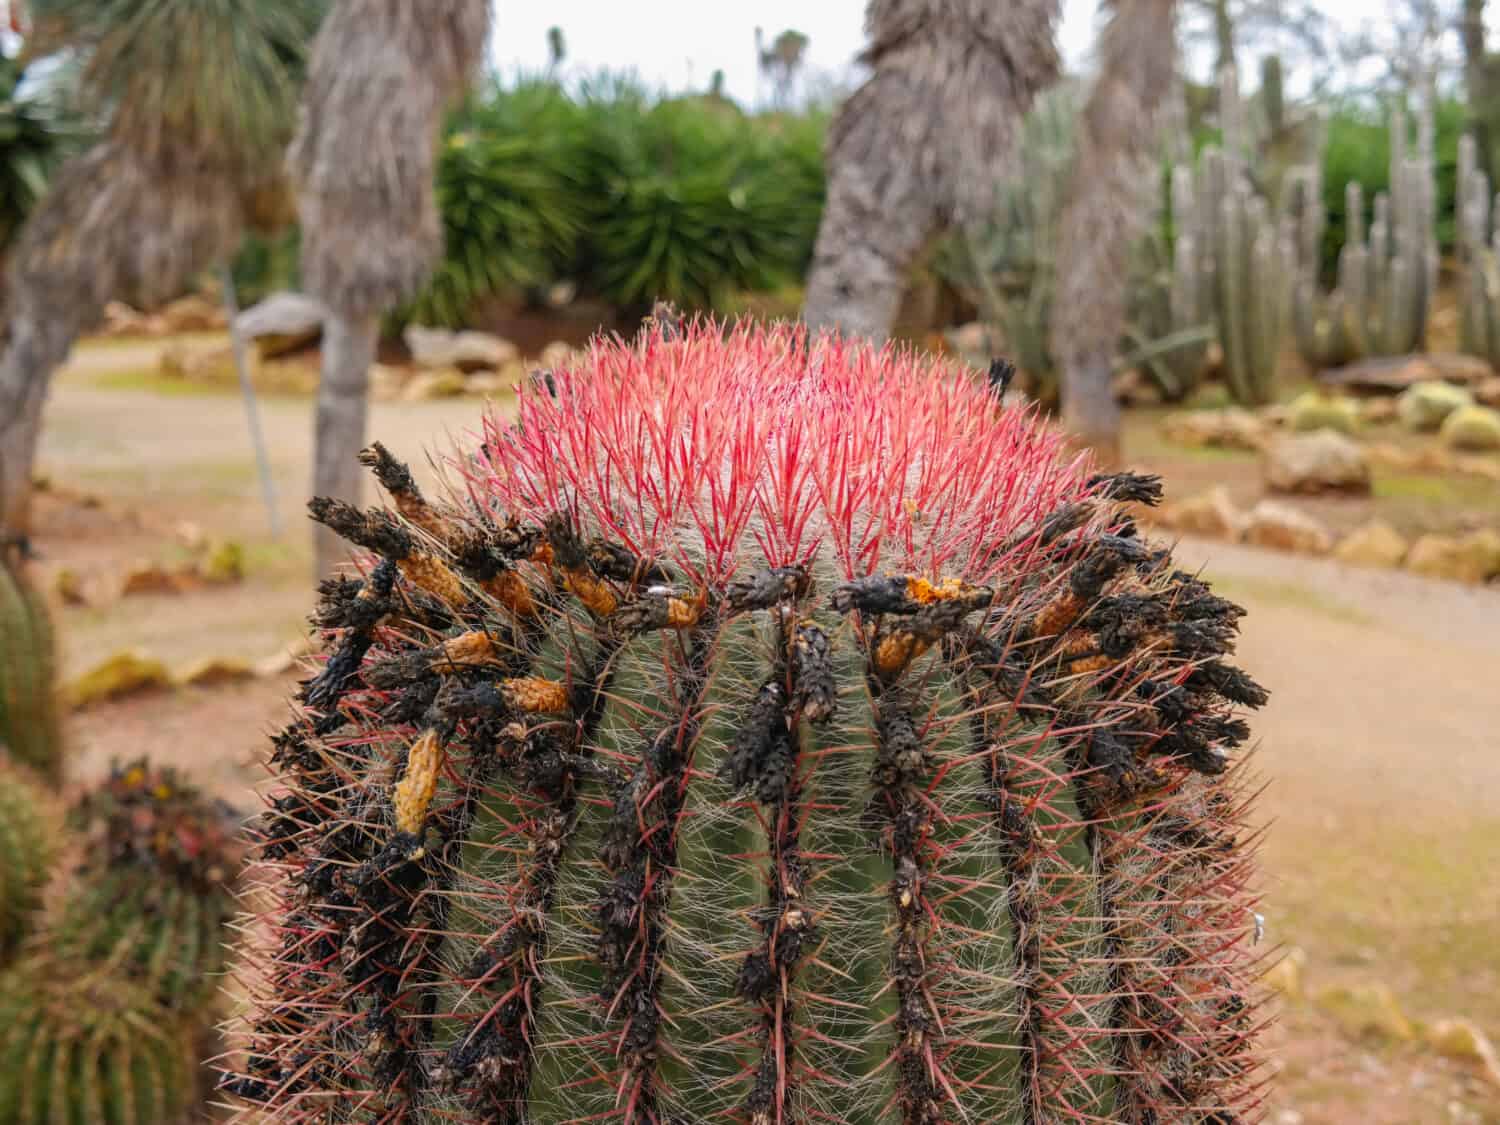 Fishhook barrel cactus or Ferocactus wislizeni plant, close up, in the blurred nature background. Upper part, of Southwestern, Arizona or candy barrel cactus, with spiny red ribs and dried up blossoms